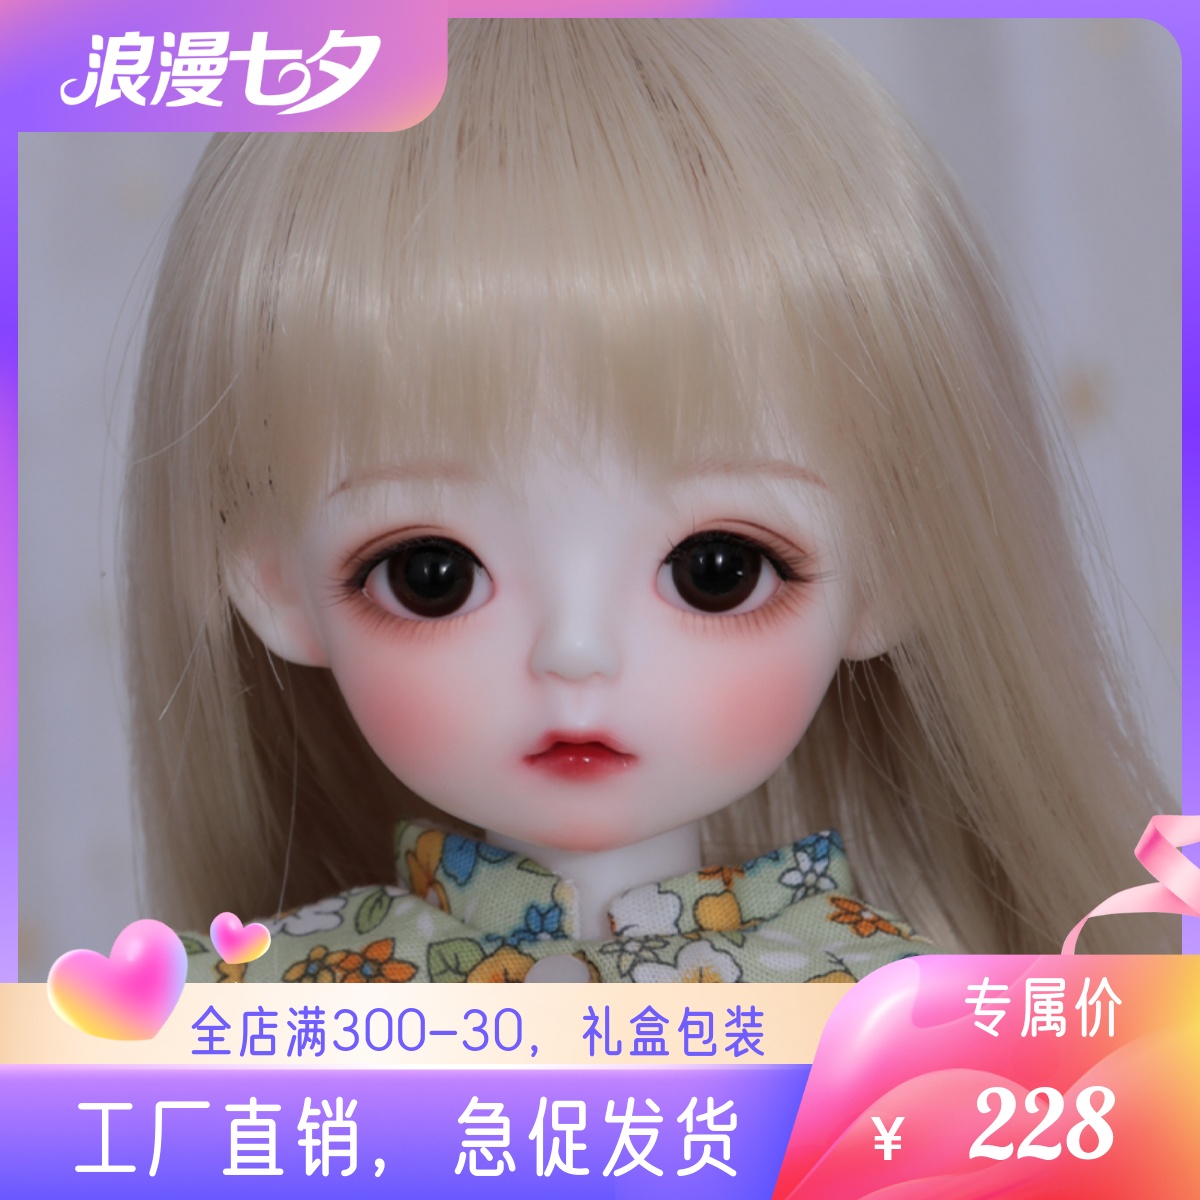 Suit Delivery Makeup BJD Doll SD Doll 1 6 Women Eva Cream Cotton Candy Knuckle Doll Gift